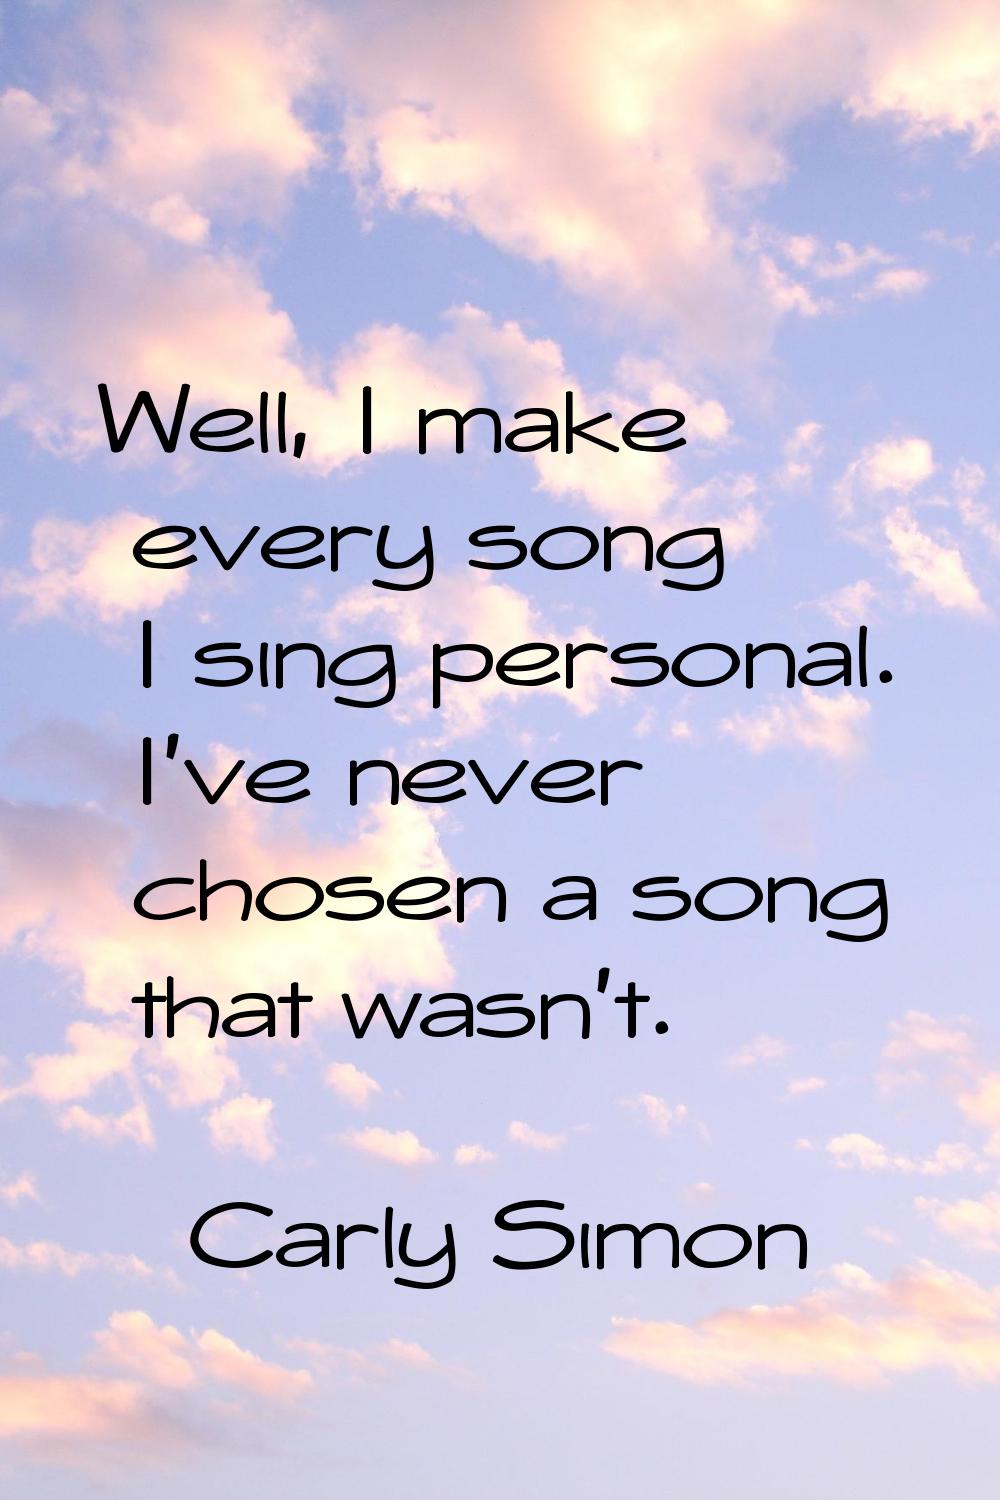 Well, I make every song I sing personal. I've never chosen a song that wasn't.